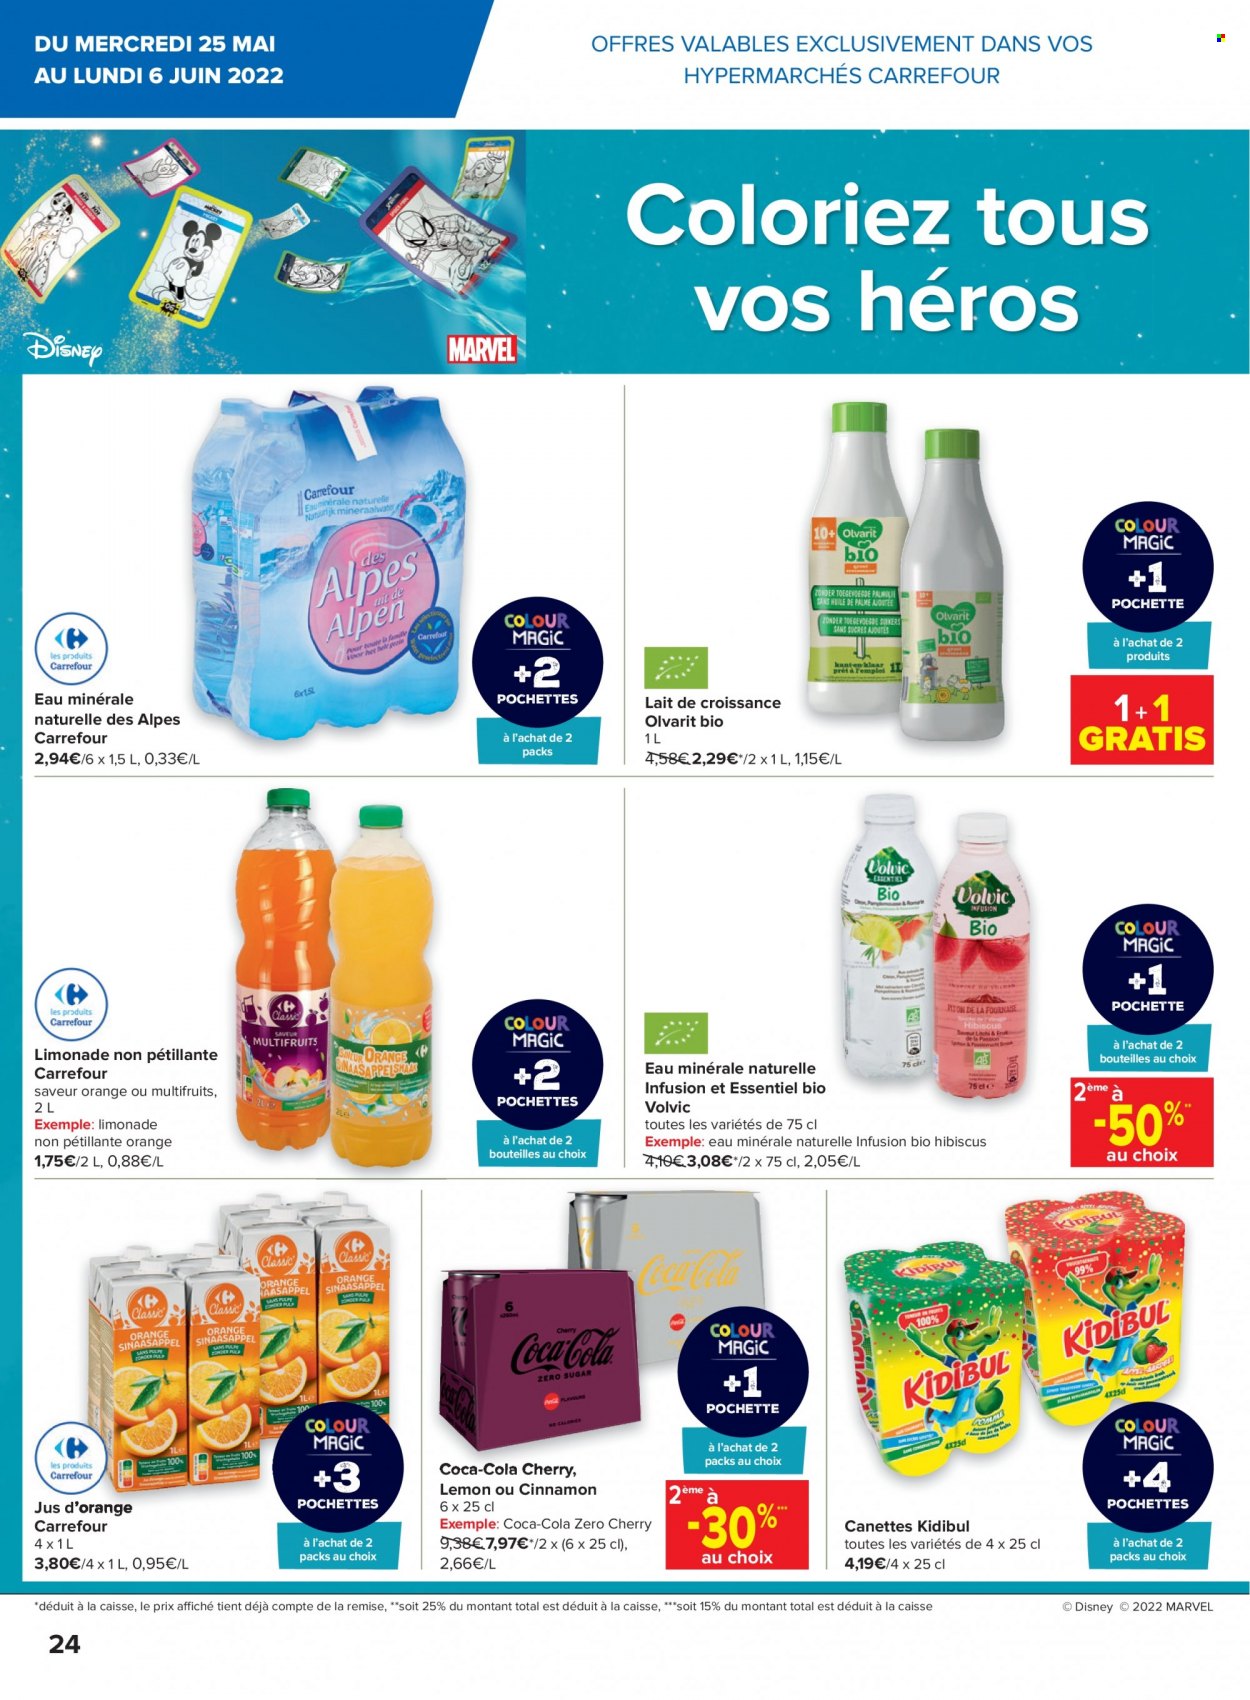 Catalogue Carrefour hypermarkt - 25.5.2022 - 31.5.2022. Page 24.